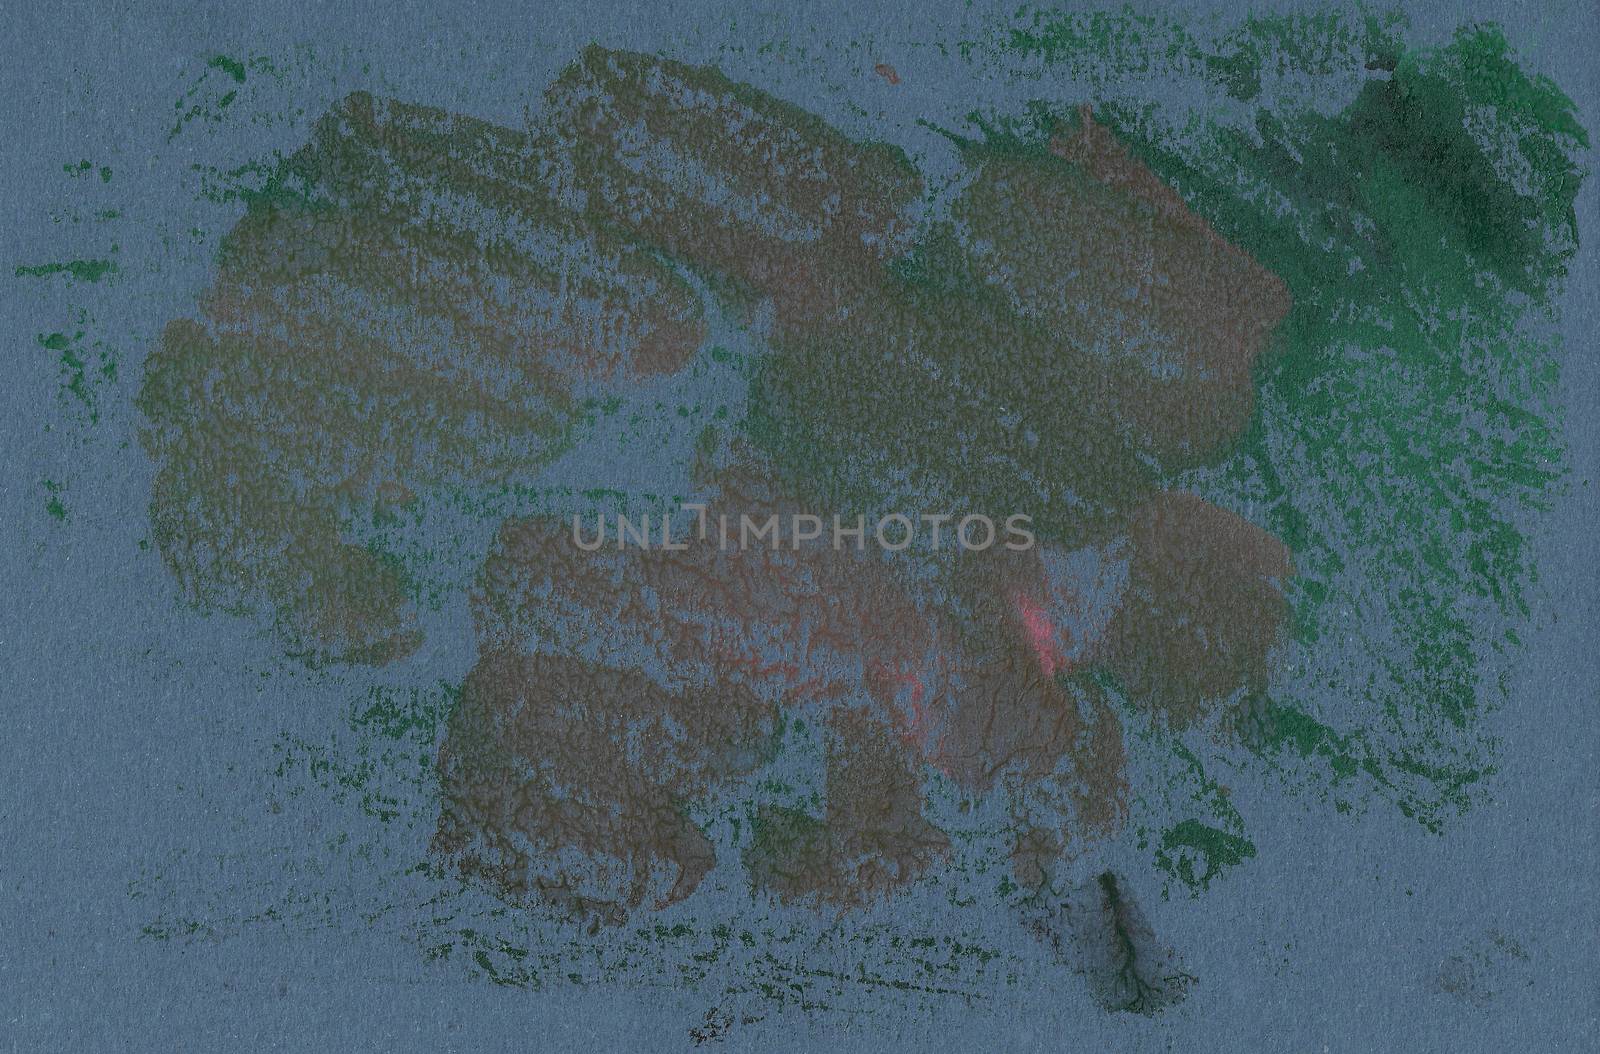 Hand-drawn texture, mono type. Stains of green and pink paint on grey craft paper. Textured background, collage material for designs, titles, price tags, flyers, wallpapers, covers and packaging.